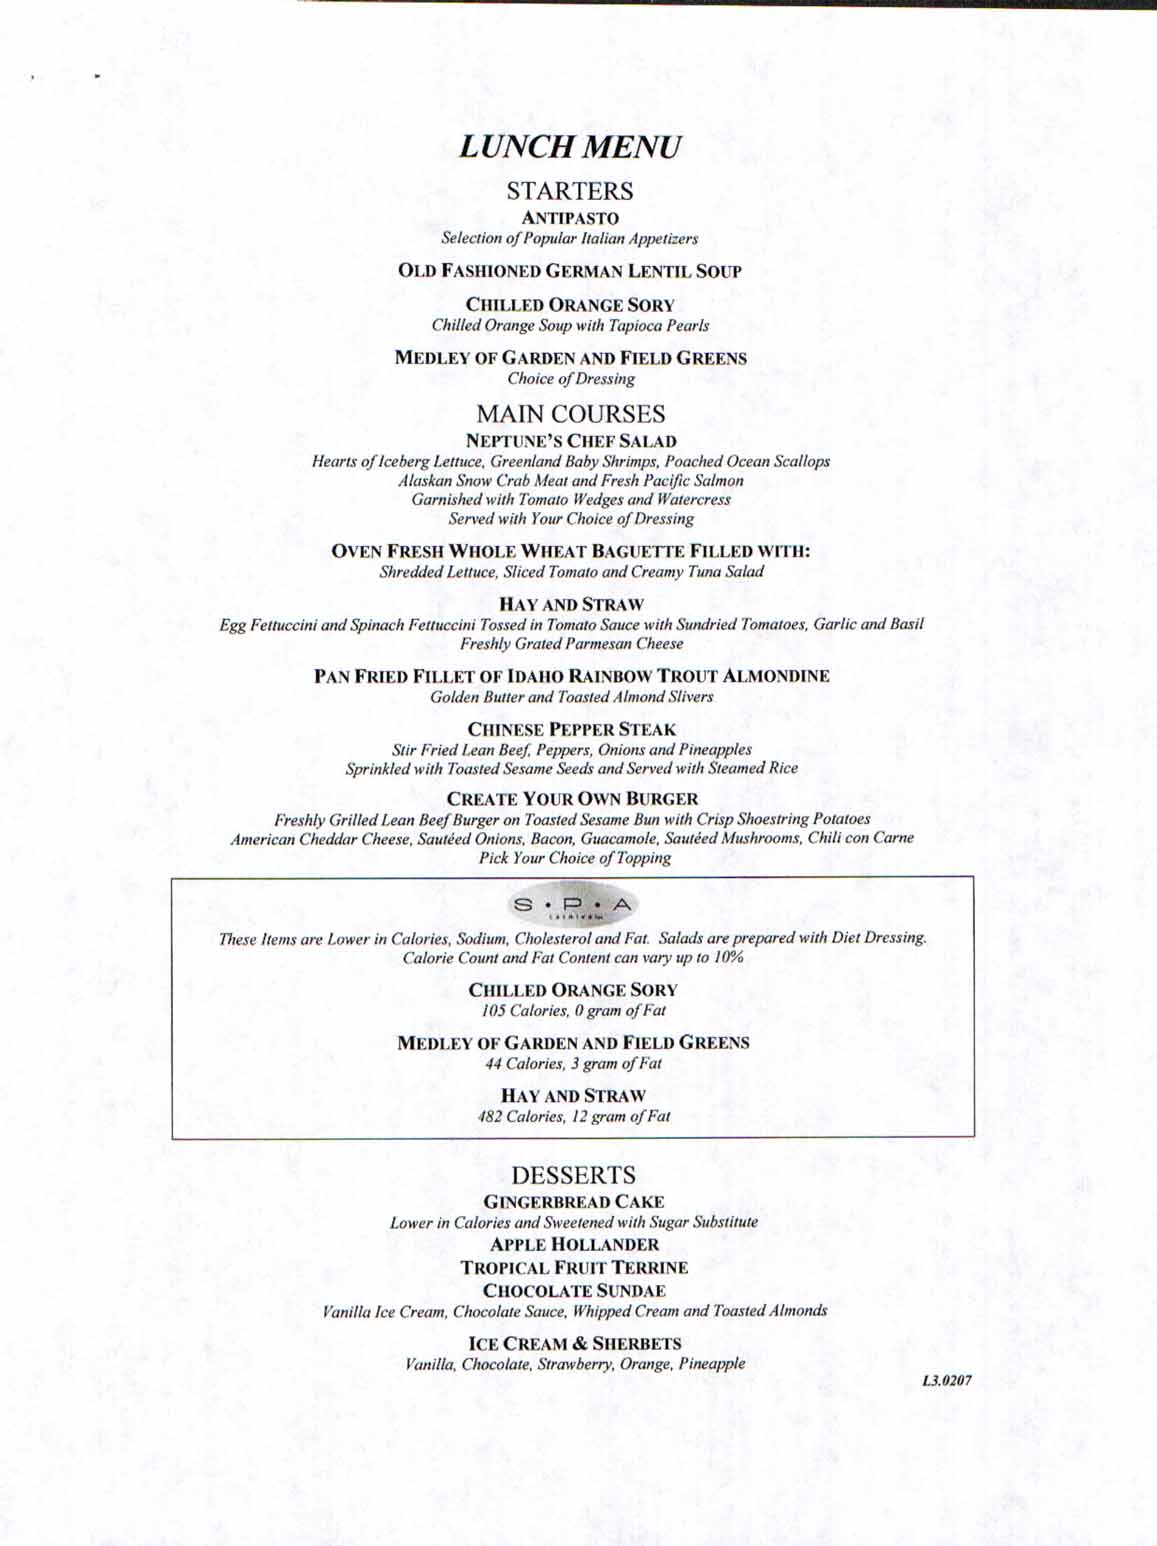 Carnival Dream Lunch Menu 3 (now they have a brunch instead)